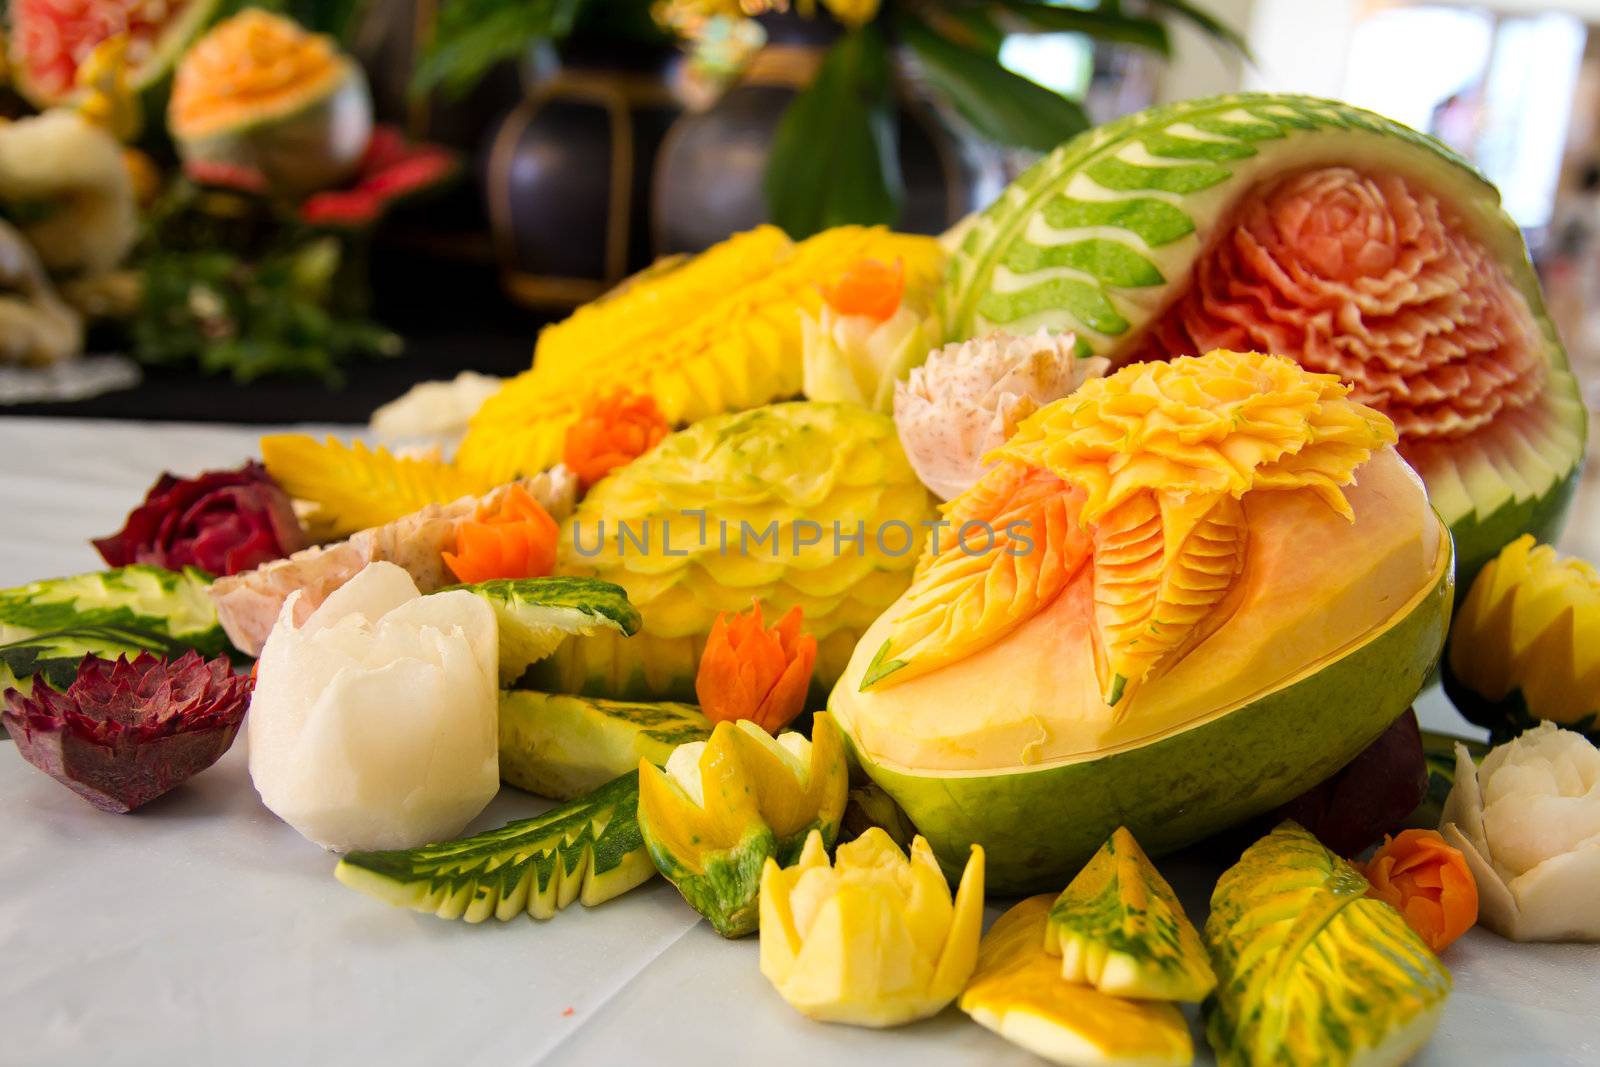 Fruit carving by Kenishirotie